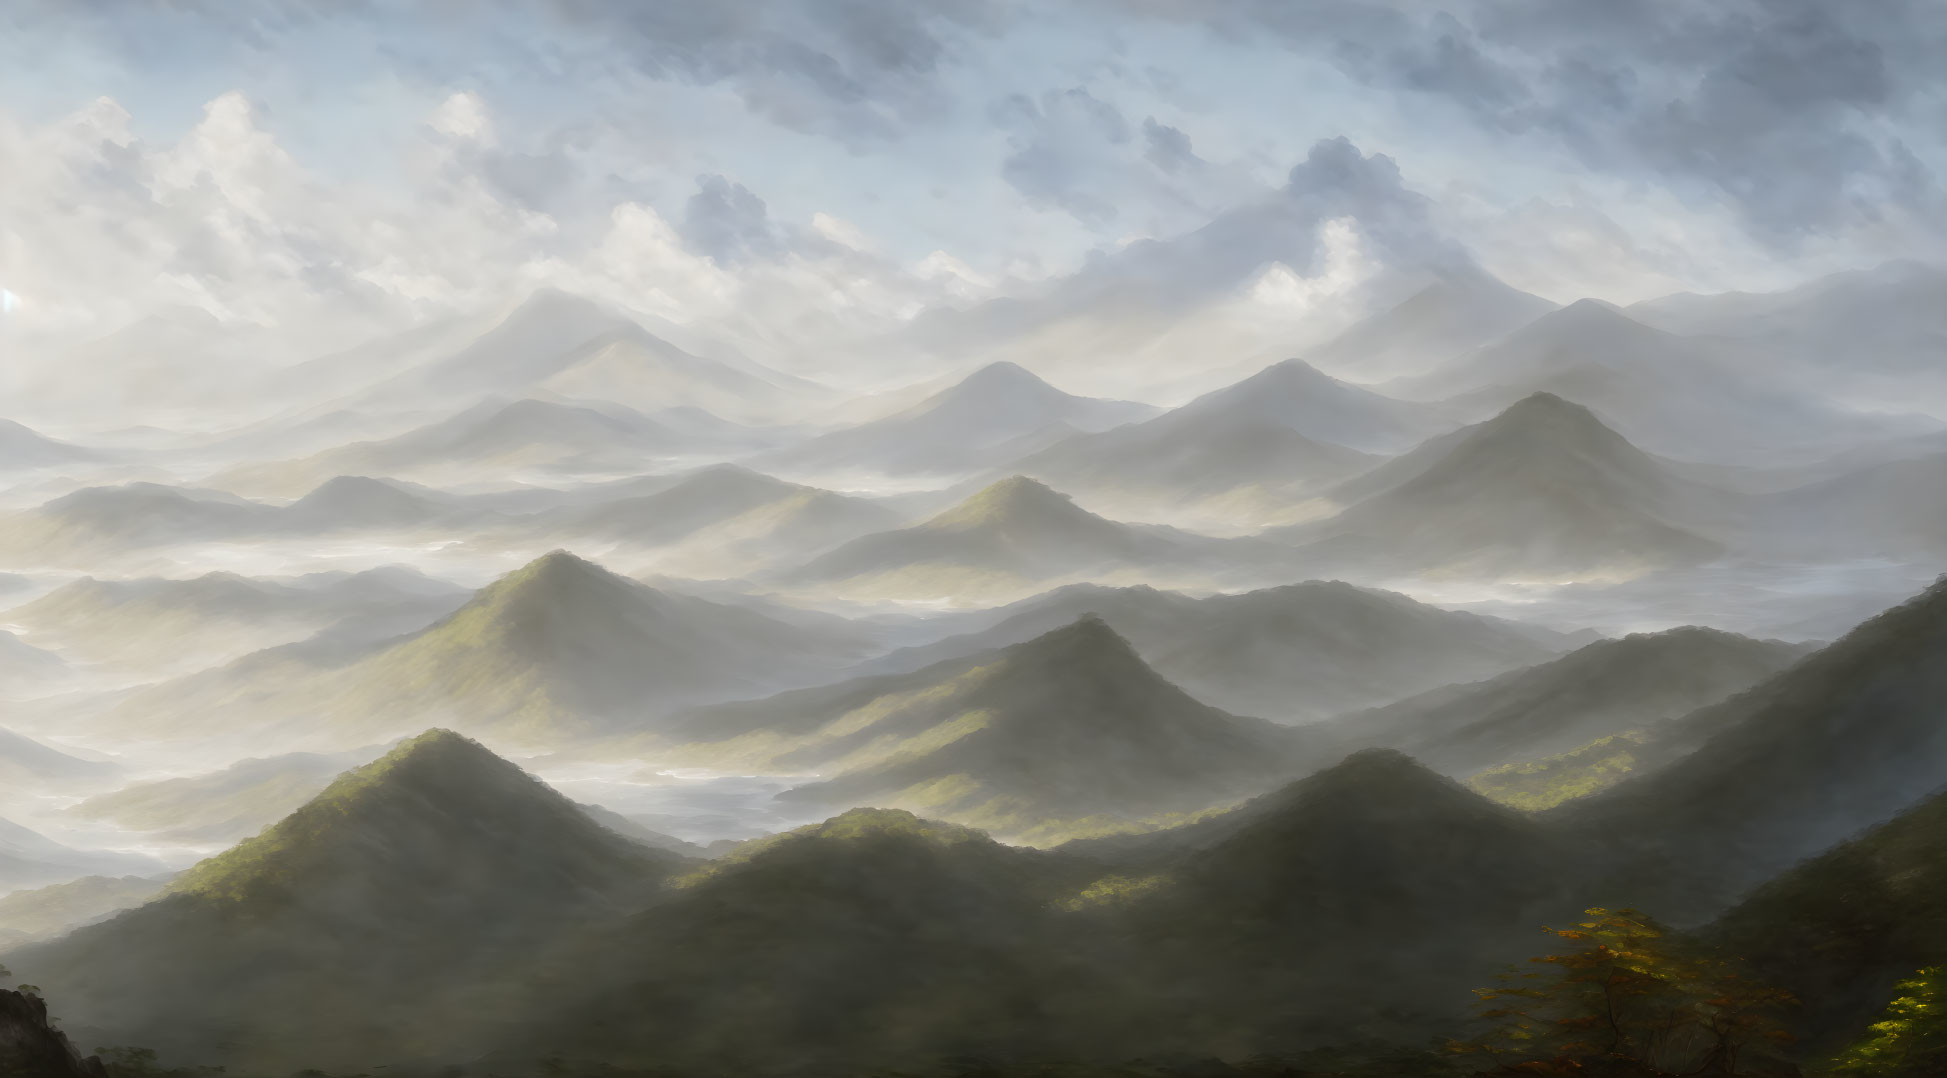 Misty mountain landscape with billowing clouds and greenery